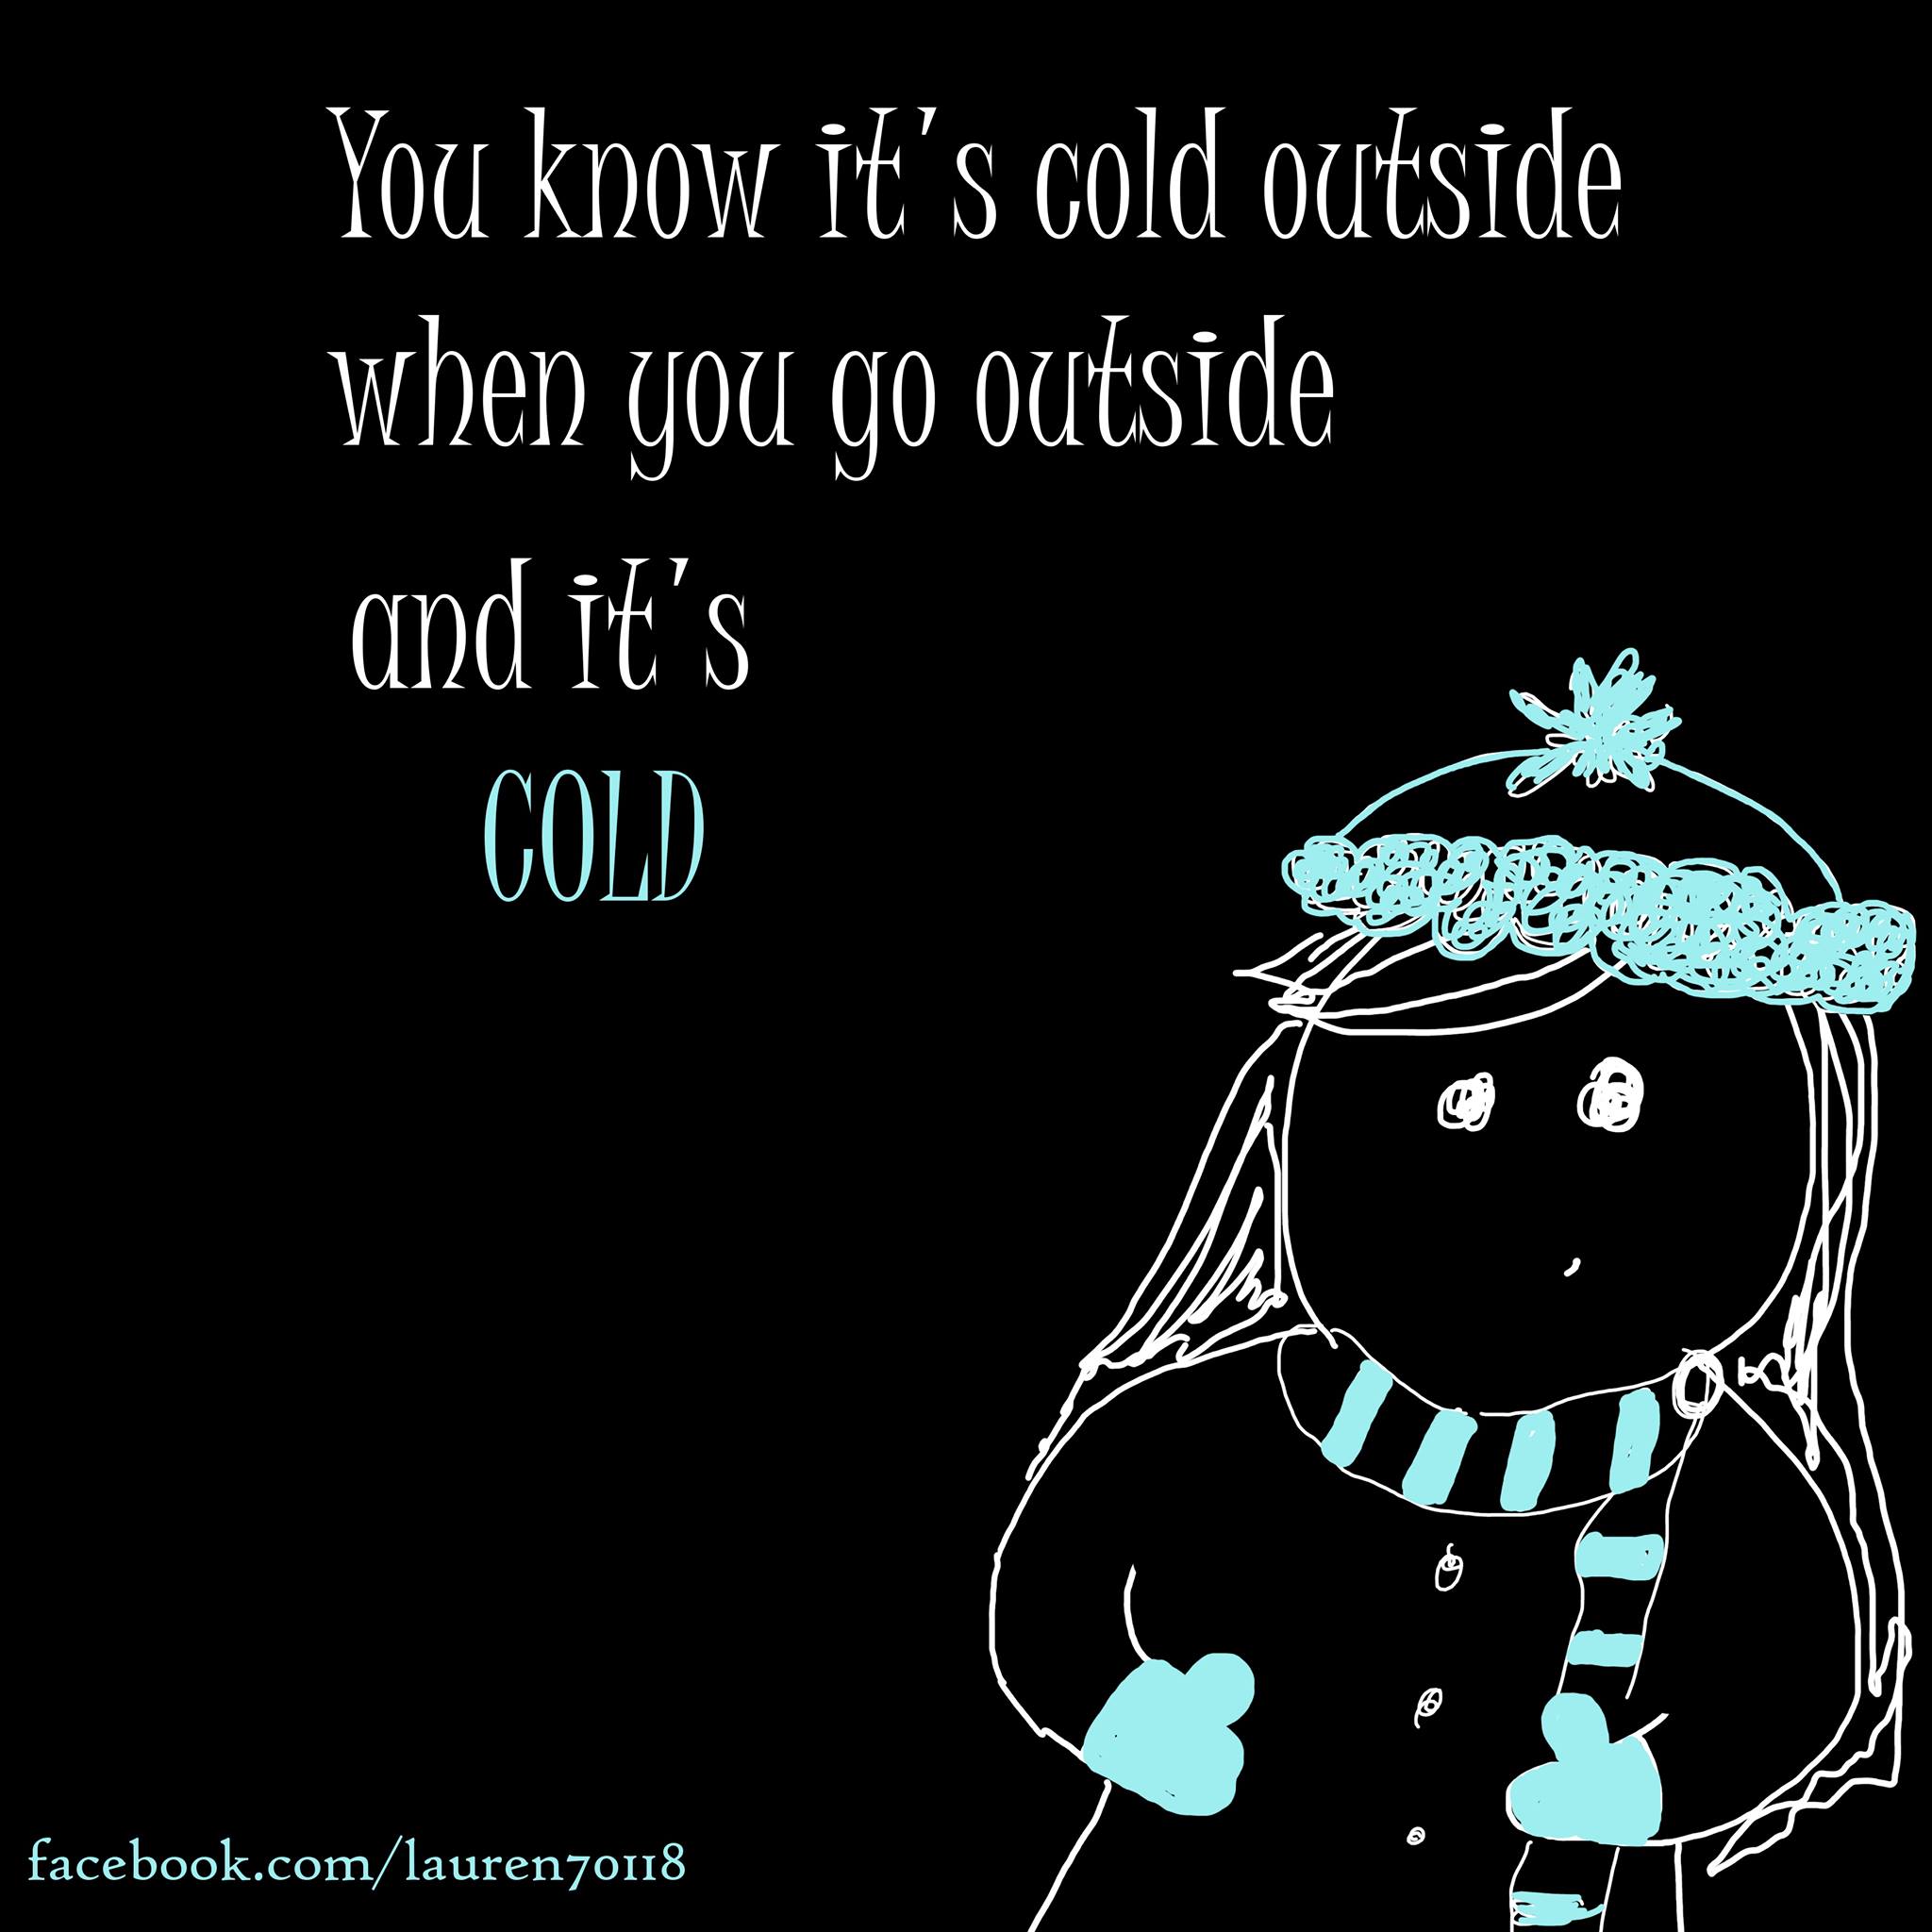 winter memes - cartoon - You know it's cold outside when you go outside and it's Cold facebook.comlauren70118